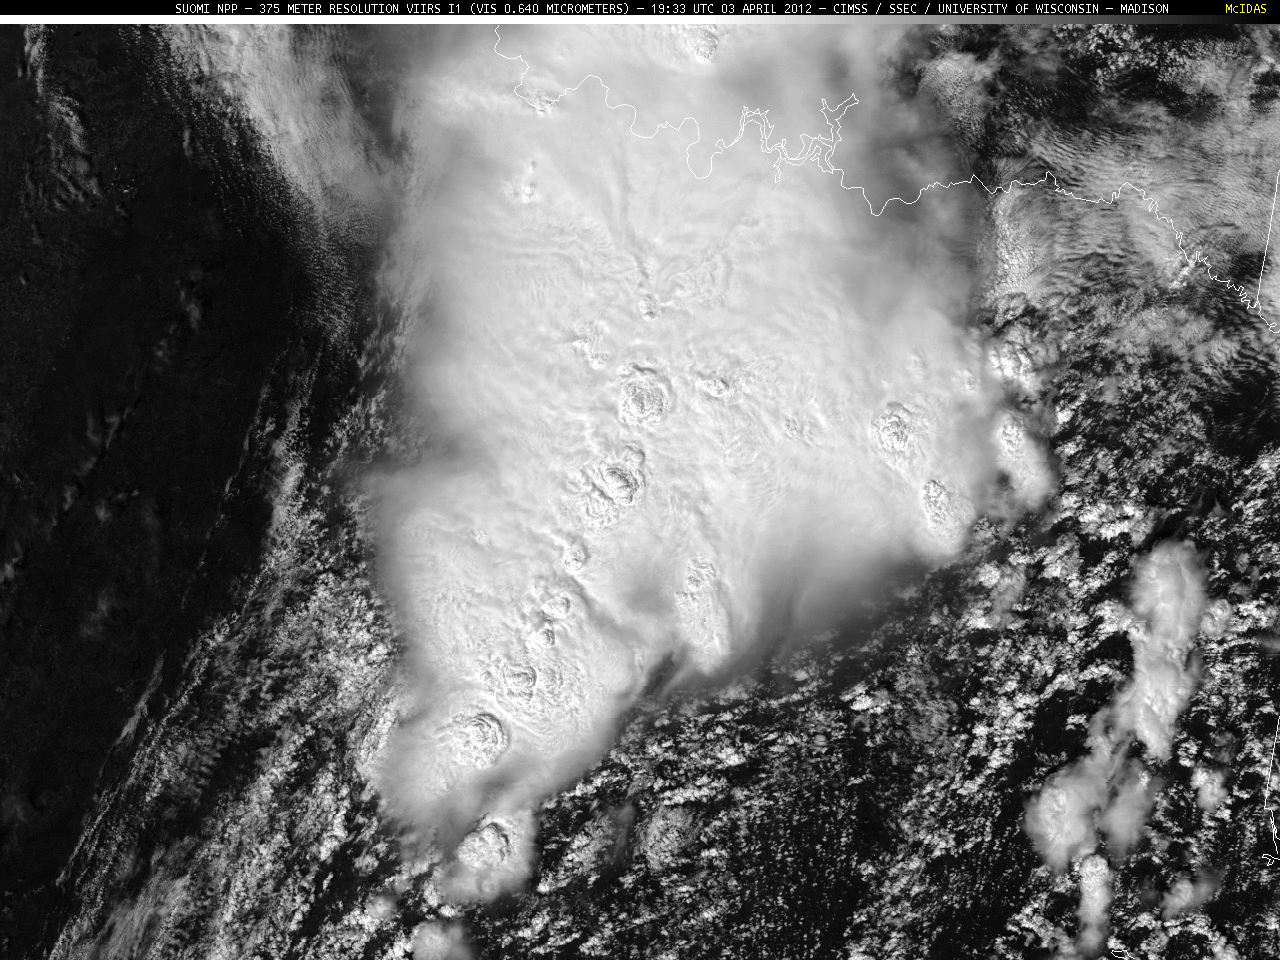 Suomi NPP VIIRS 0.64 Âµm visible and 11.45 Âµm IR images (northeastern Texas)